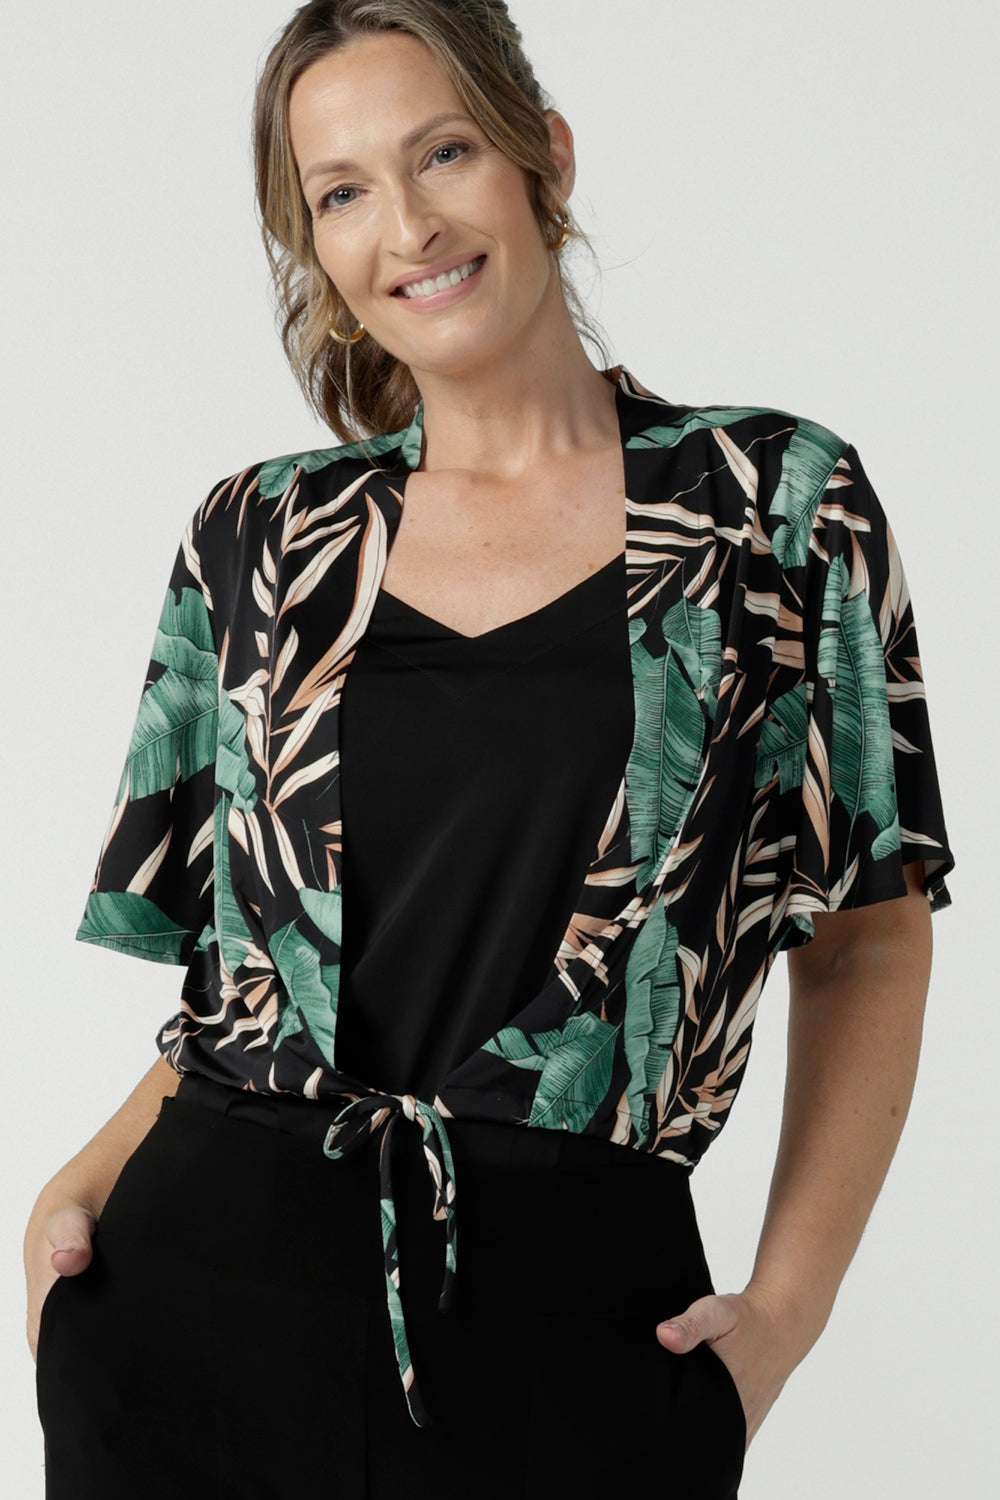 Tropical printed shrug cardigan. Featuring a leaf print on a black background. Ruched waist tie detail tie detail. Great layering piece. Ladies inclusive sizing. Size 8 pictured.